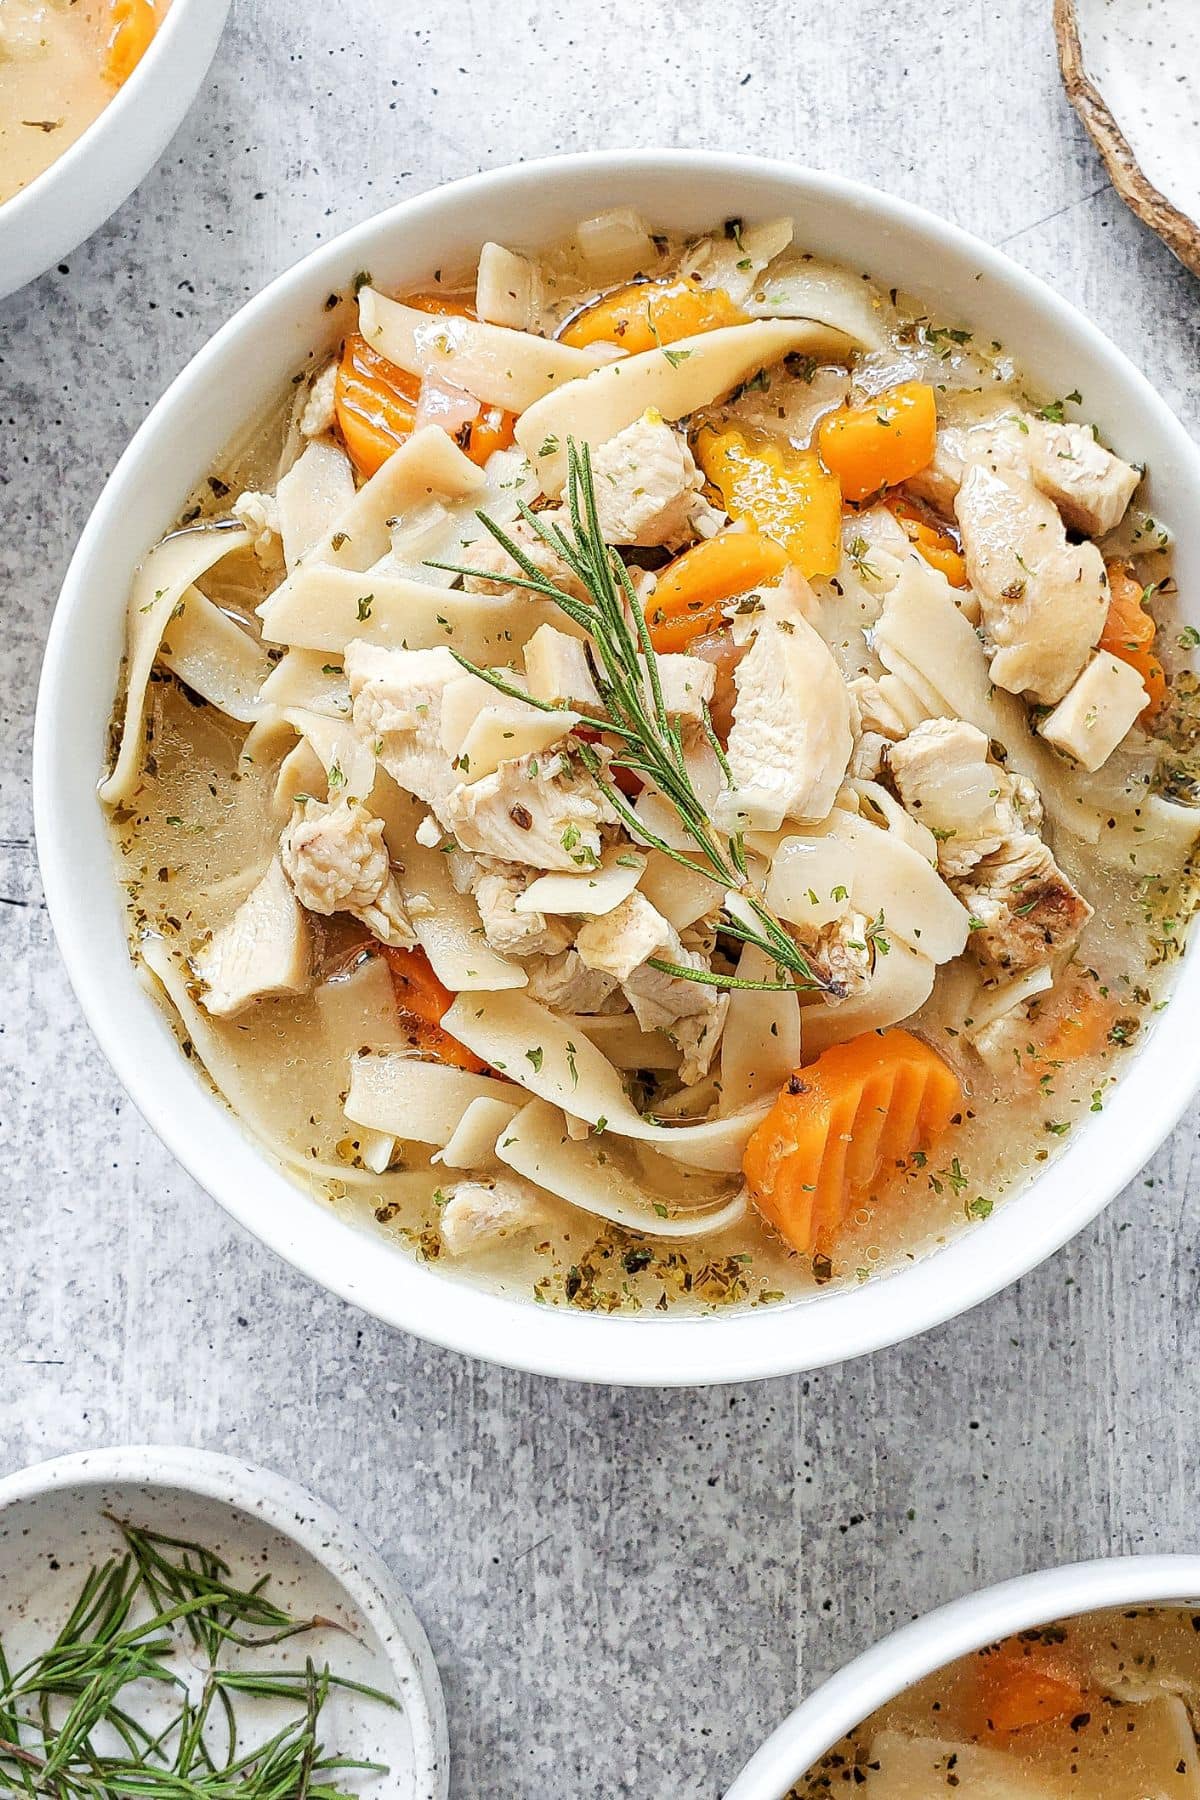 A white bowl with chicken noodle soup in a flavorful broth, garnishes with fresh rosemary herb.